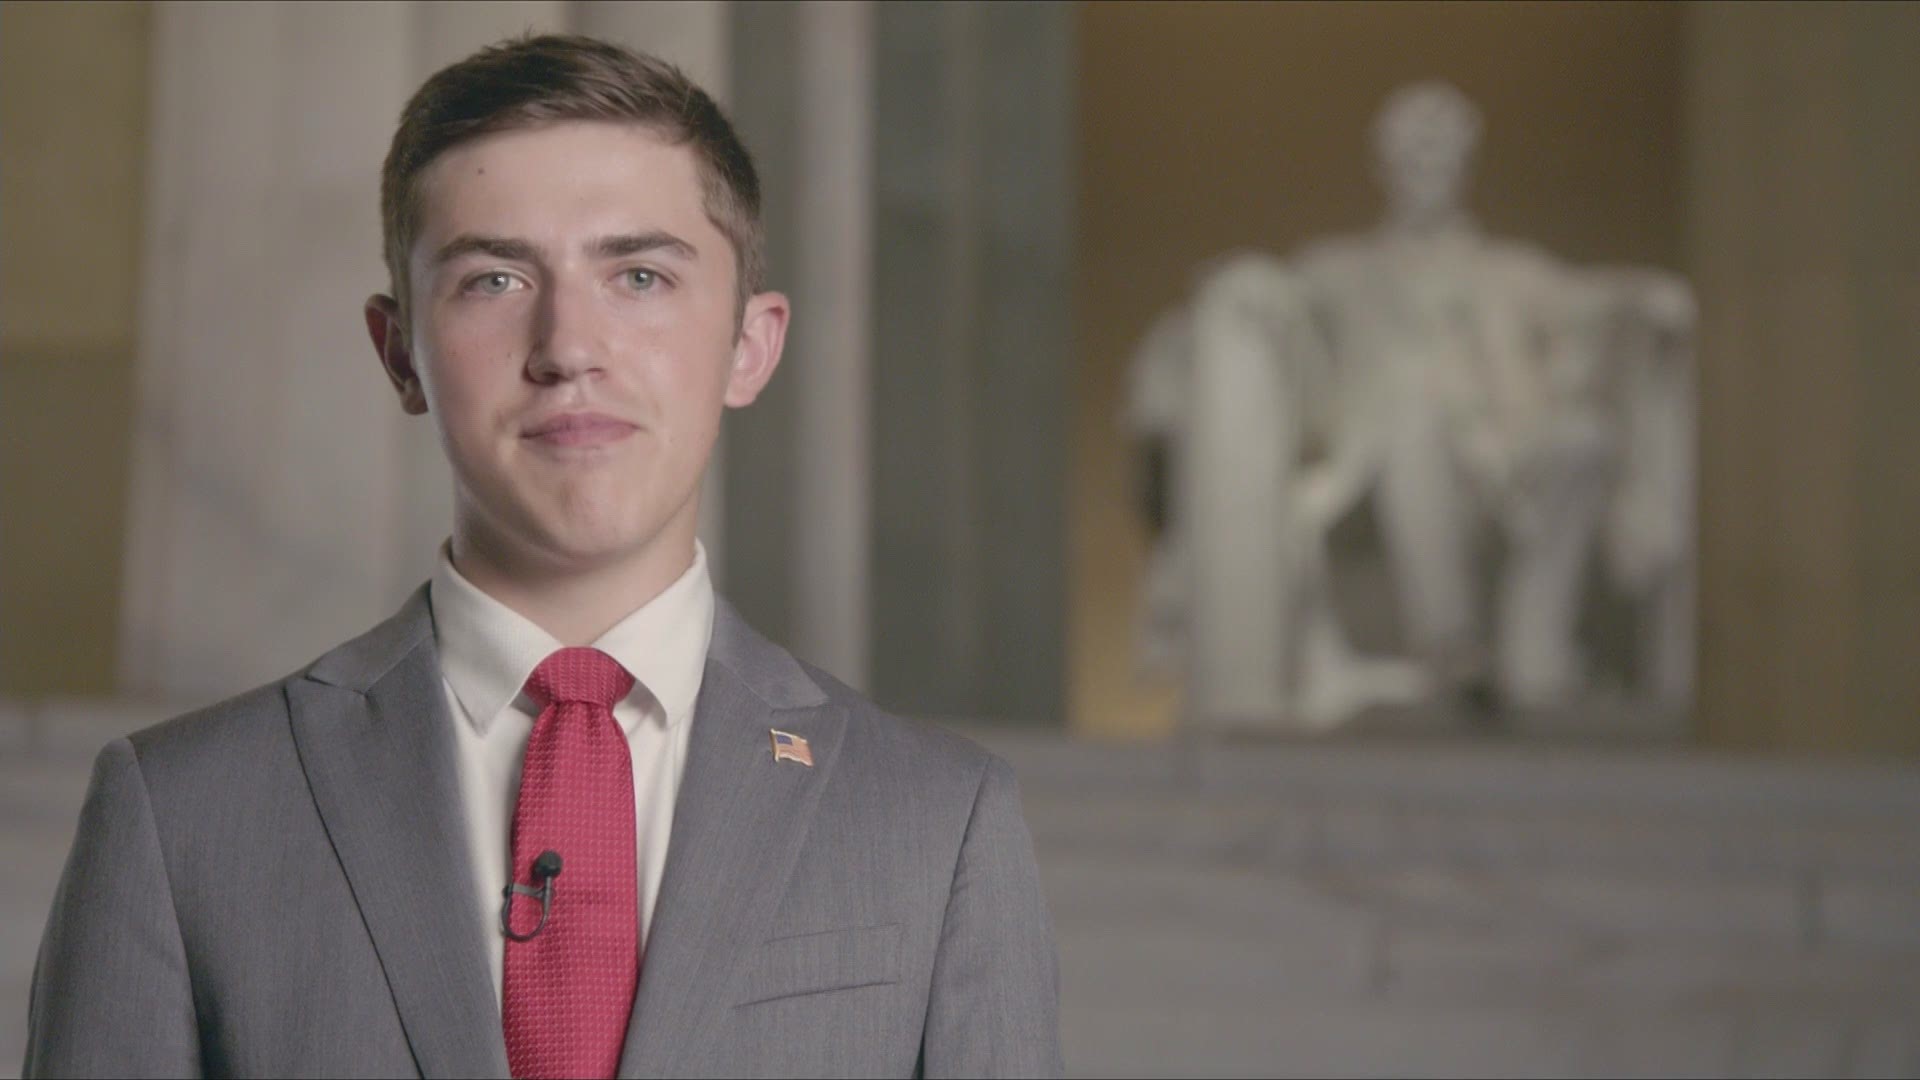 A Kentucky teen known for video of his interaction with a Native American man during dueling demonstrations at the Lincoln Memorial spoke Tuesday at the RNC.